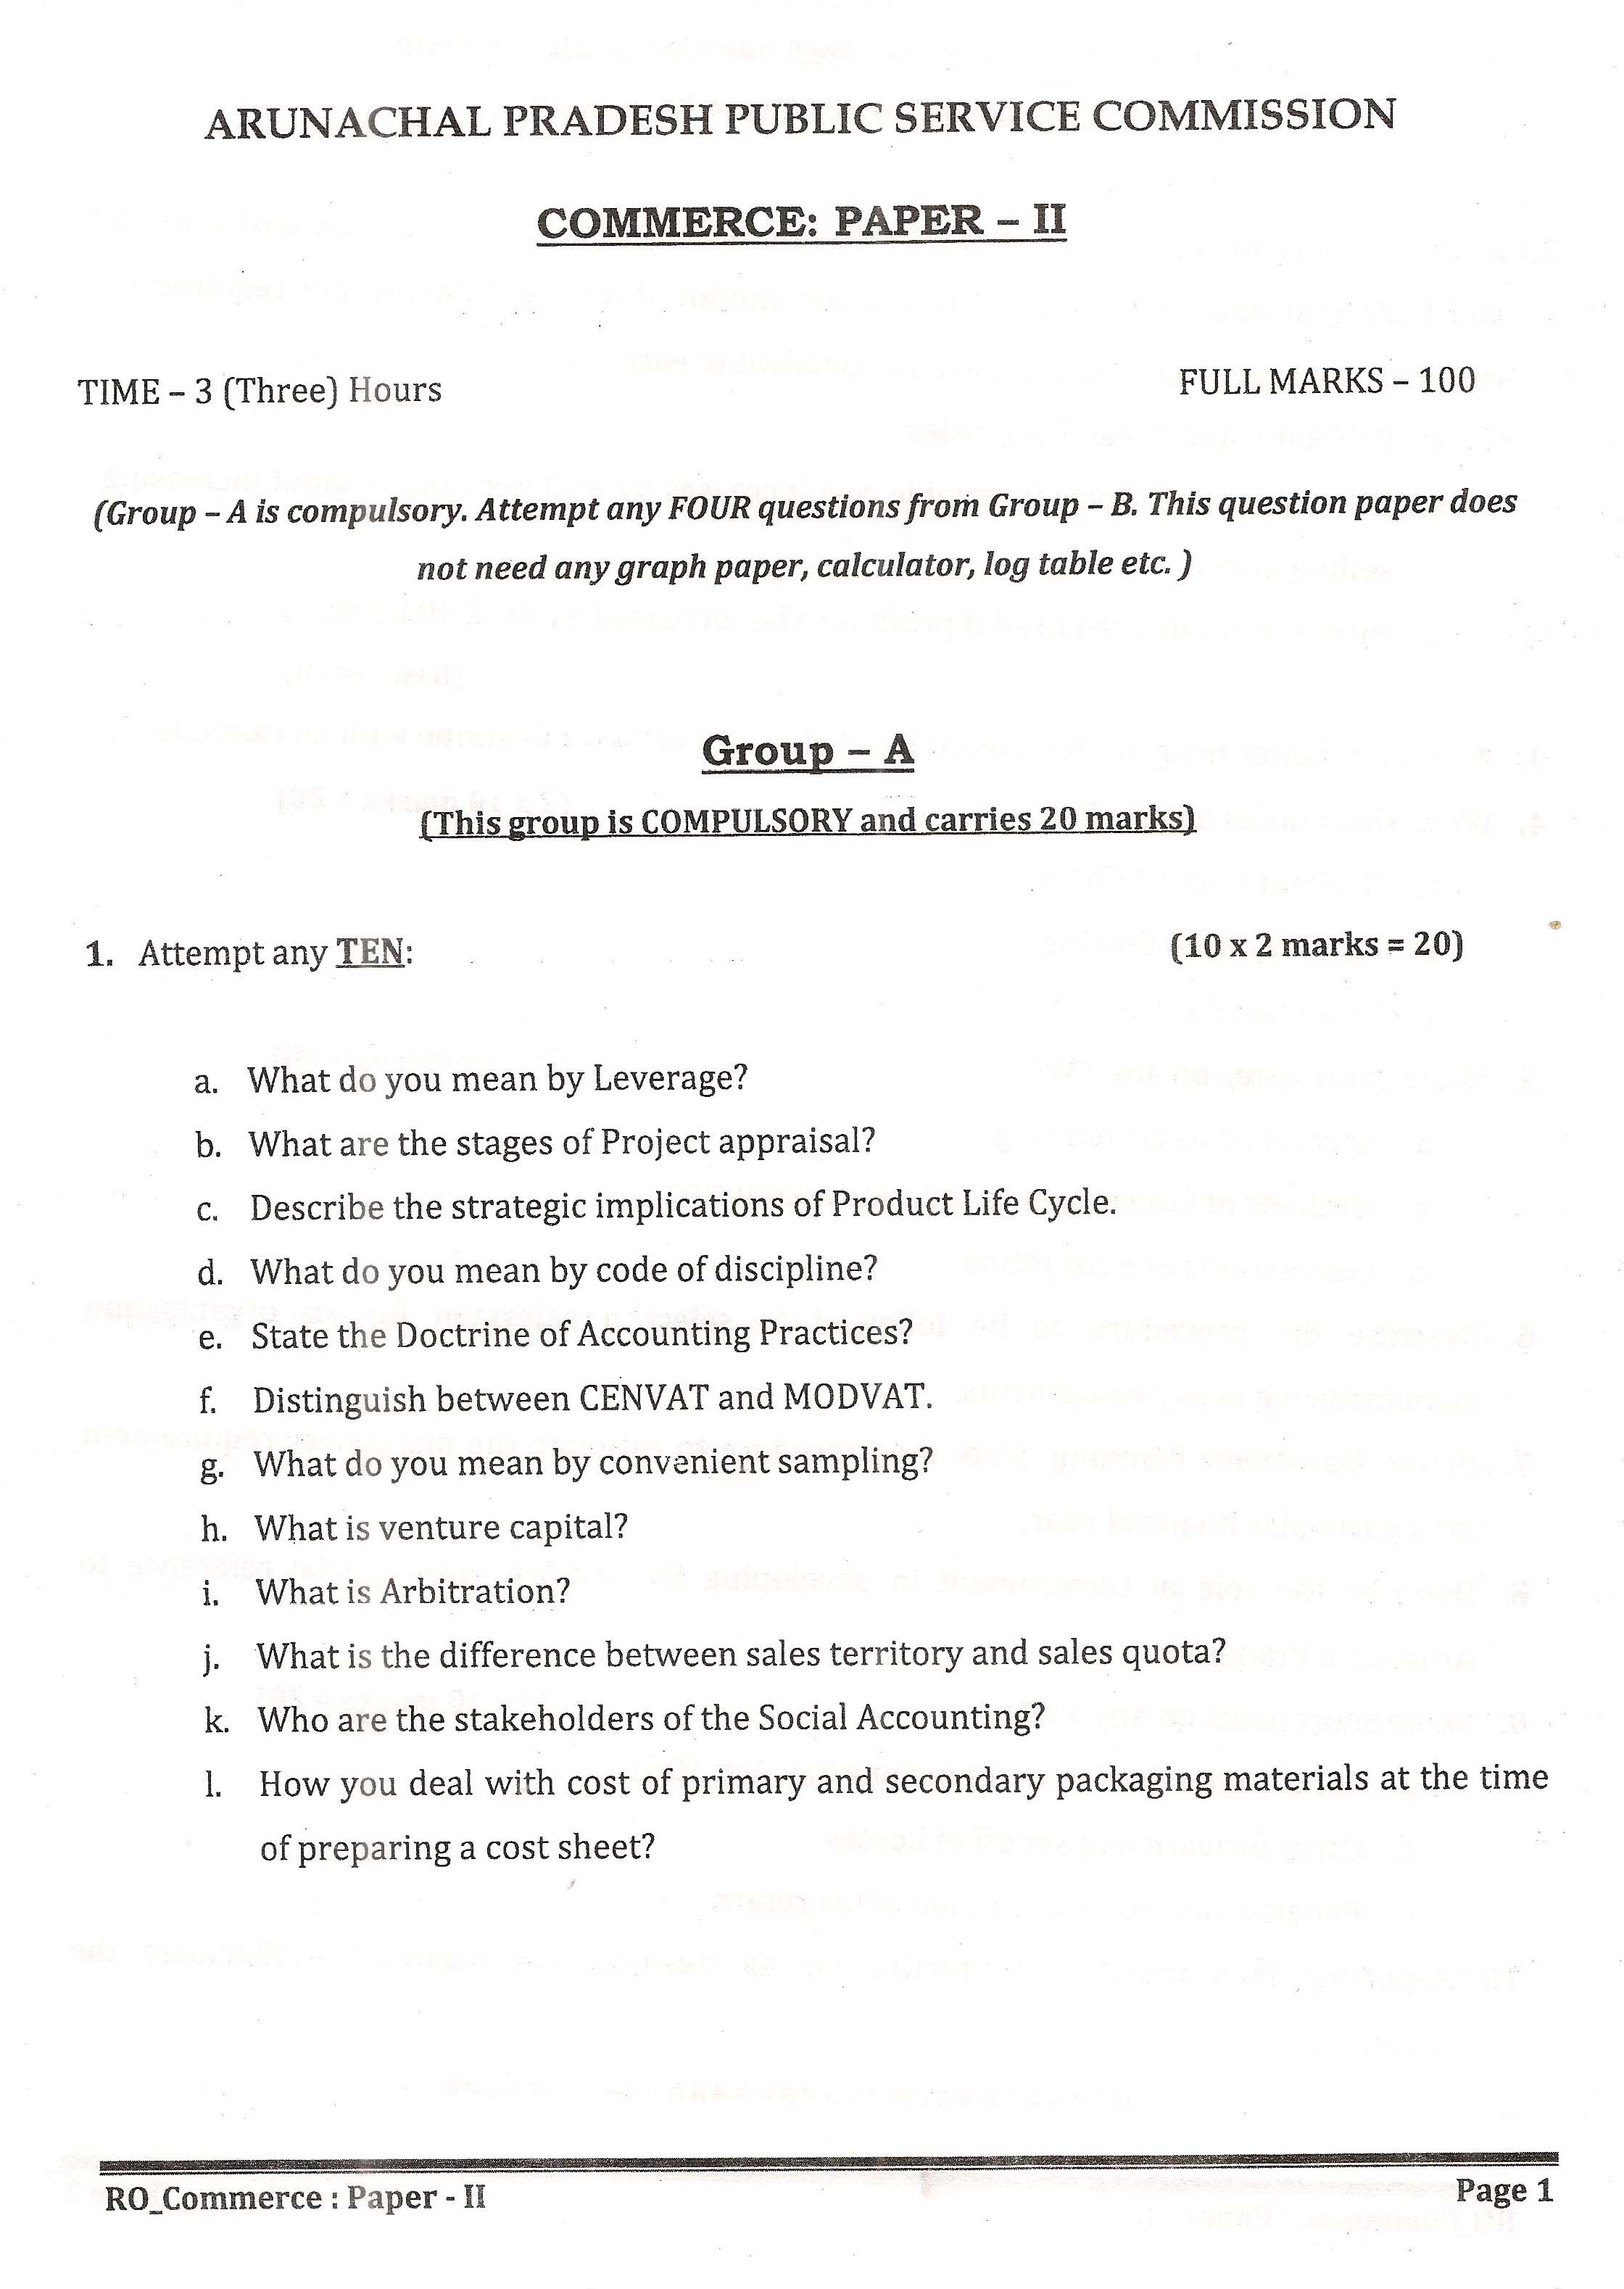 APPSC Research Officer Commerce Paper II Exam Question Paper 2014 1